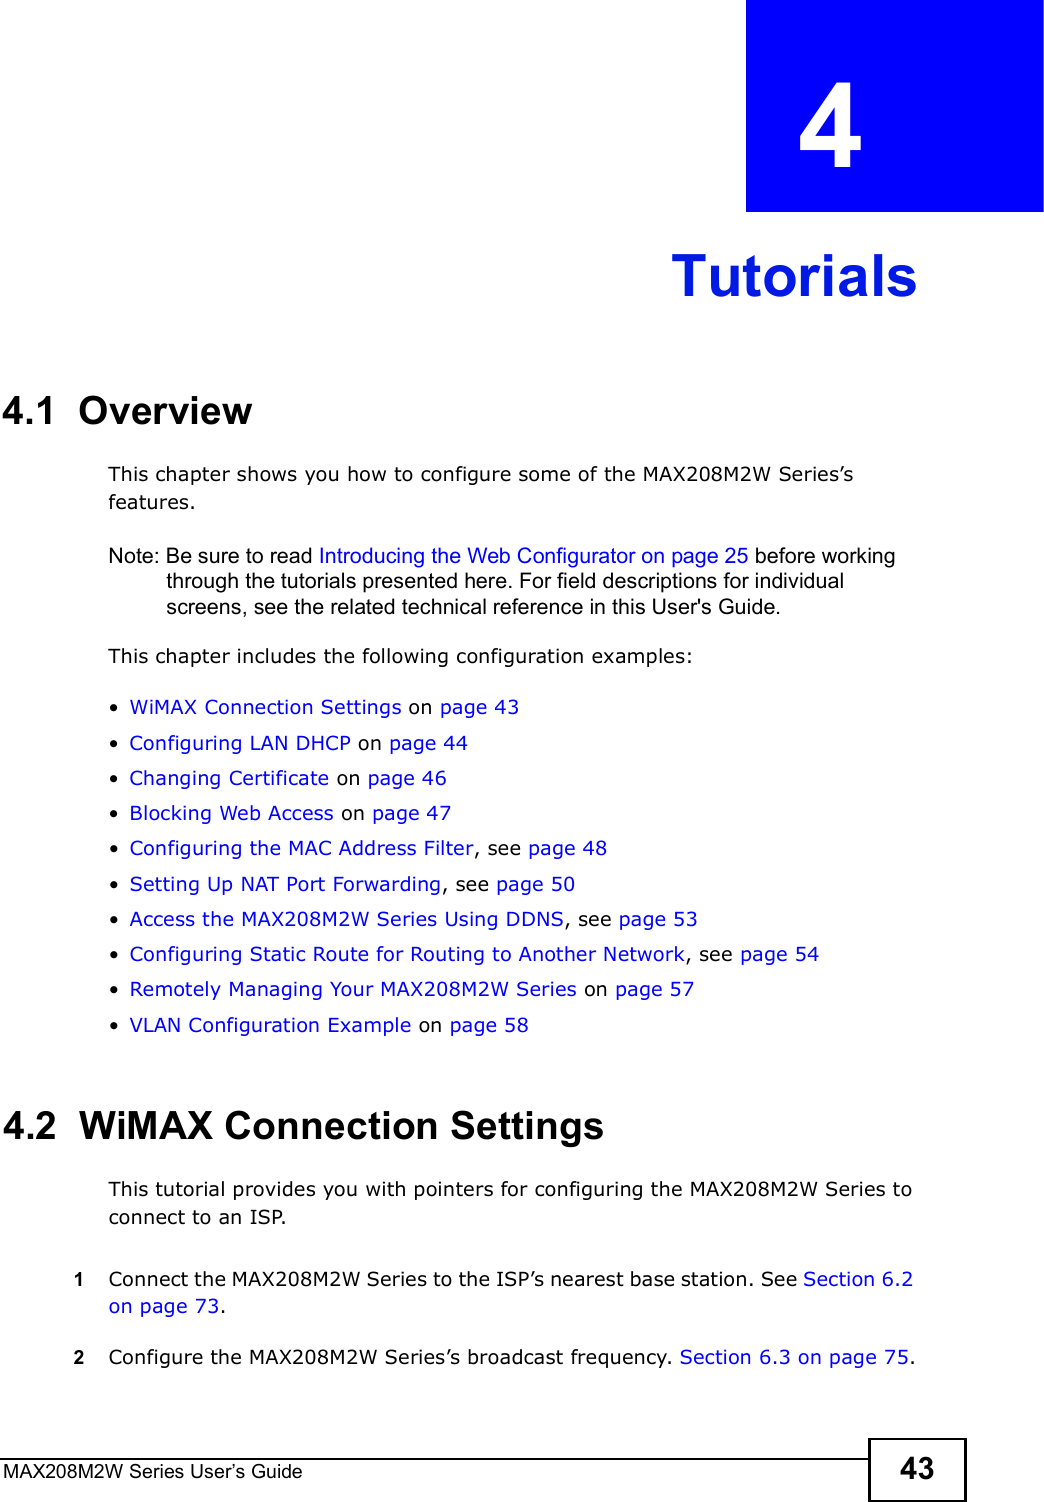 MAX208M2W Series User s Guide 43CHAPTER  4 Tutorials4.1  OverviewThis chapter shows you how to configure some of the MAX208M2W Series s features.Note: Be sure to read Introducing the Web Configurator on page 25 before working through the tutorials presented here. For field descriptions for individual screens, see the related technical reference in this User&apos;s Guide.This chapter includes the following configuration examples:!WiMAX Connection Settings on page 43!Configuring LAN DHCP on page 44!Changing Certificate on page 46!Blocking Web Access on page 47!Configuring the MAC Address Filter, see page48!Setting Up NAT Port Forwarding, see page 50!Access the MAX208M2W Series Using DDNS, see page 53!Configuring Static Route for Routing to Another Network, see page 54!Remotely Managing Your MAX208M2W Series on page 57!VLAN Configuration Example on page 584.2  WiMAX Connection SettingsThis tutorial provides you with pointers for configuring the MAX208M2W Series to connect to an ISP.1Connect the MAX208M2W Series to the ISP s nearest base station. See Section 6.2 on page 73.2Configure the MAX208M2W Series s broadcast frequency. Section 6.3 on page 75.